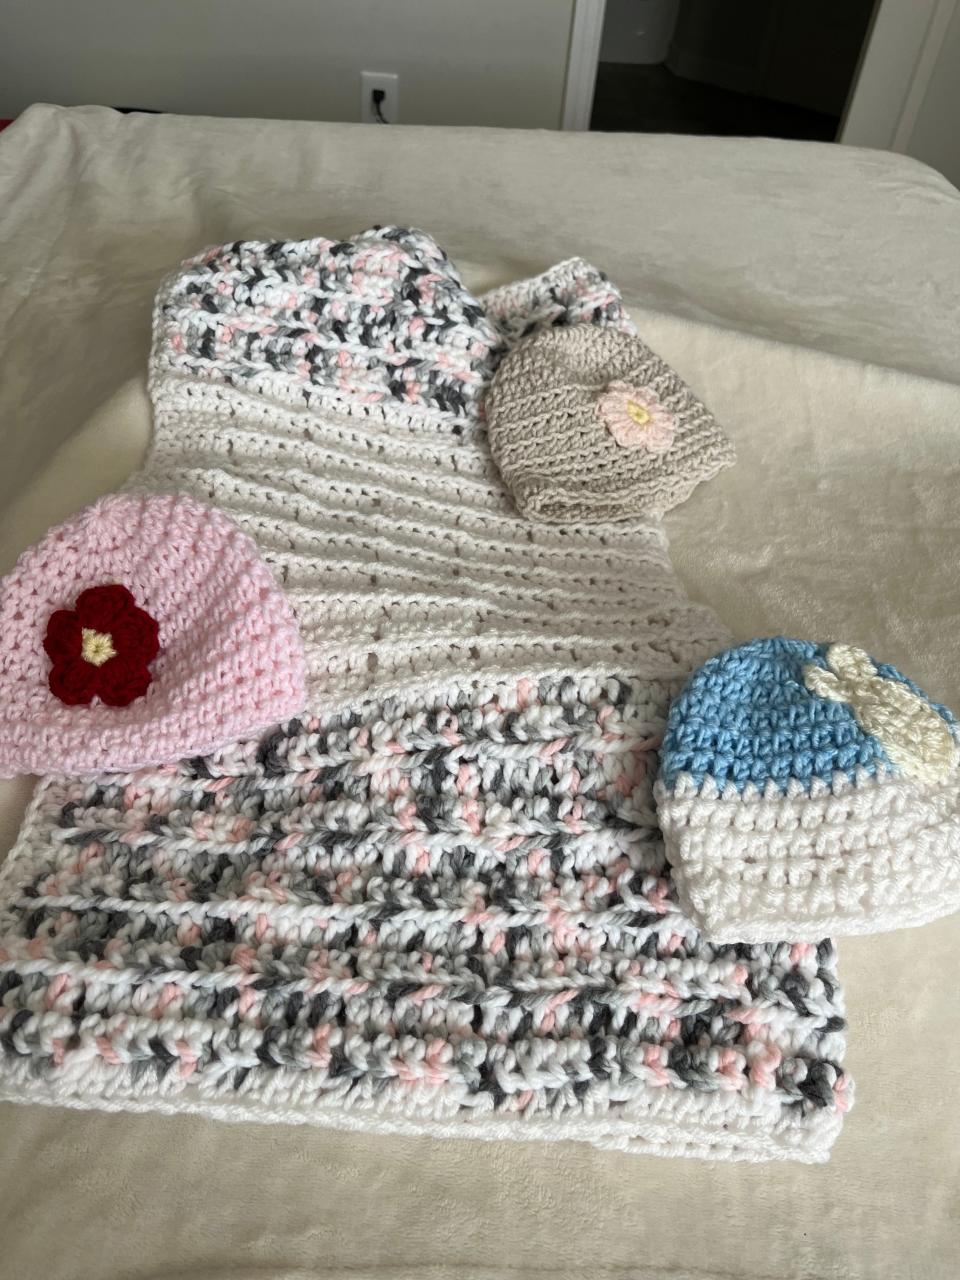 Linda Clark, 70, started knitting preemie hats in various sizes about four years ago for babies spending their early days of life in East Tennessee Children's Hospital's neonatal intensive care unit.